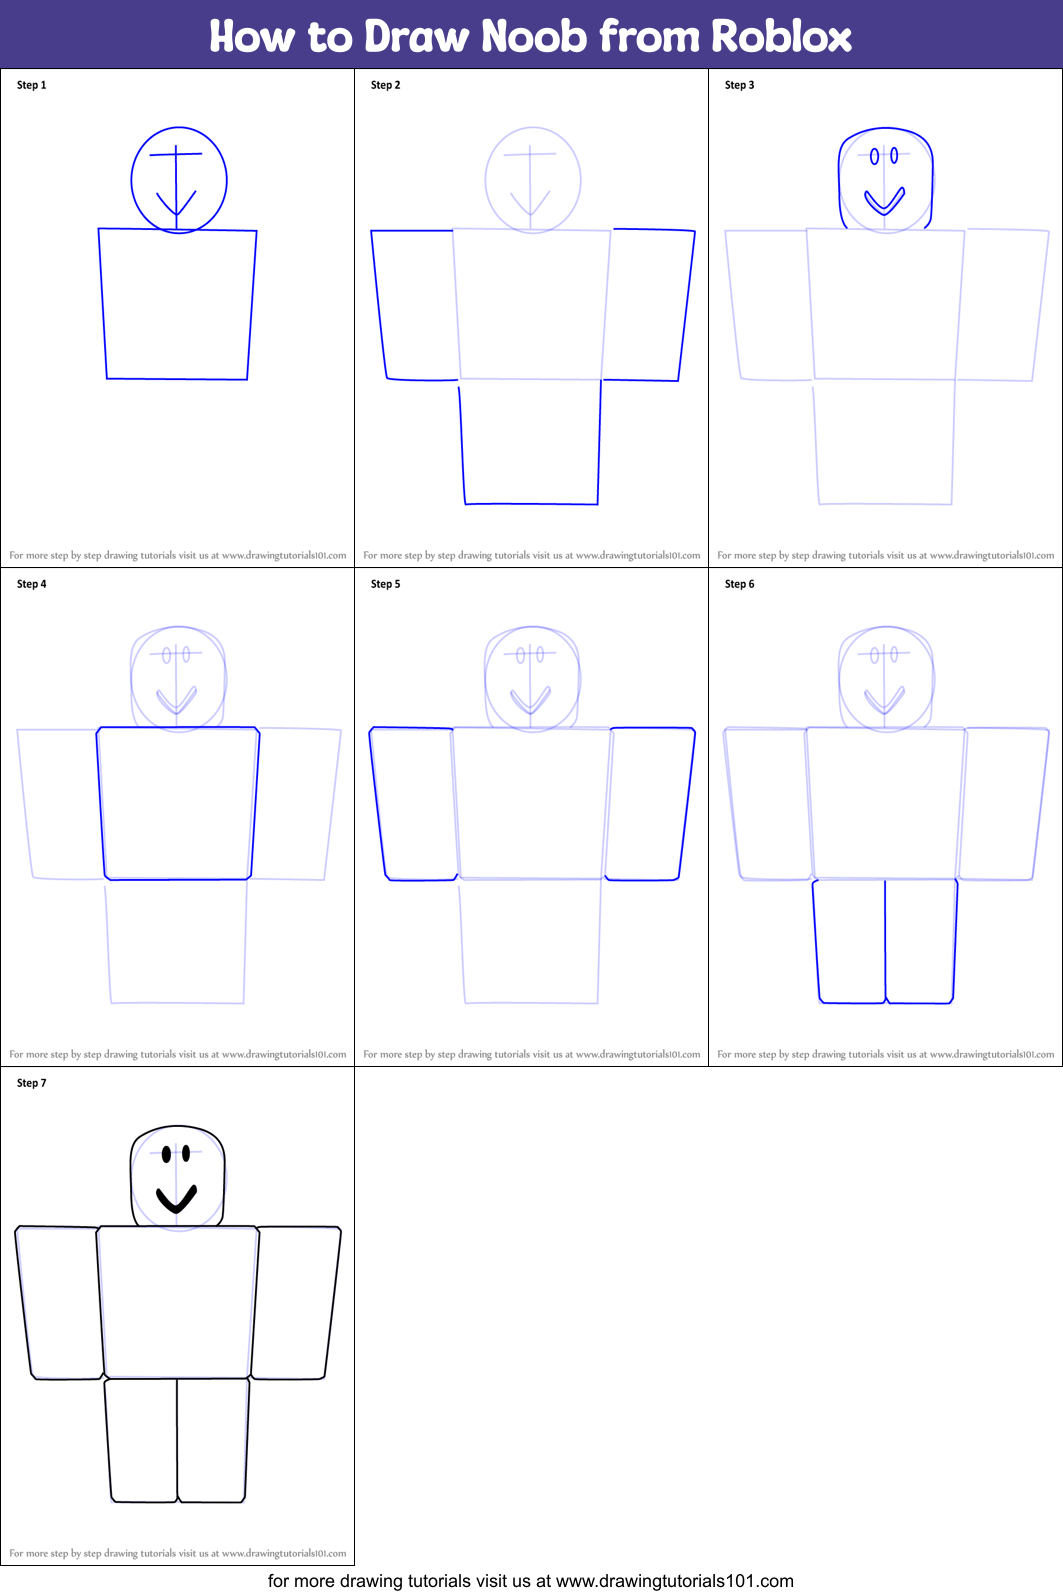 How To Draw Roblox Characters Step By Step Drawings For Kids And People